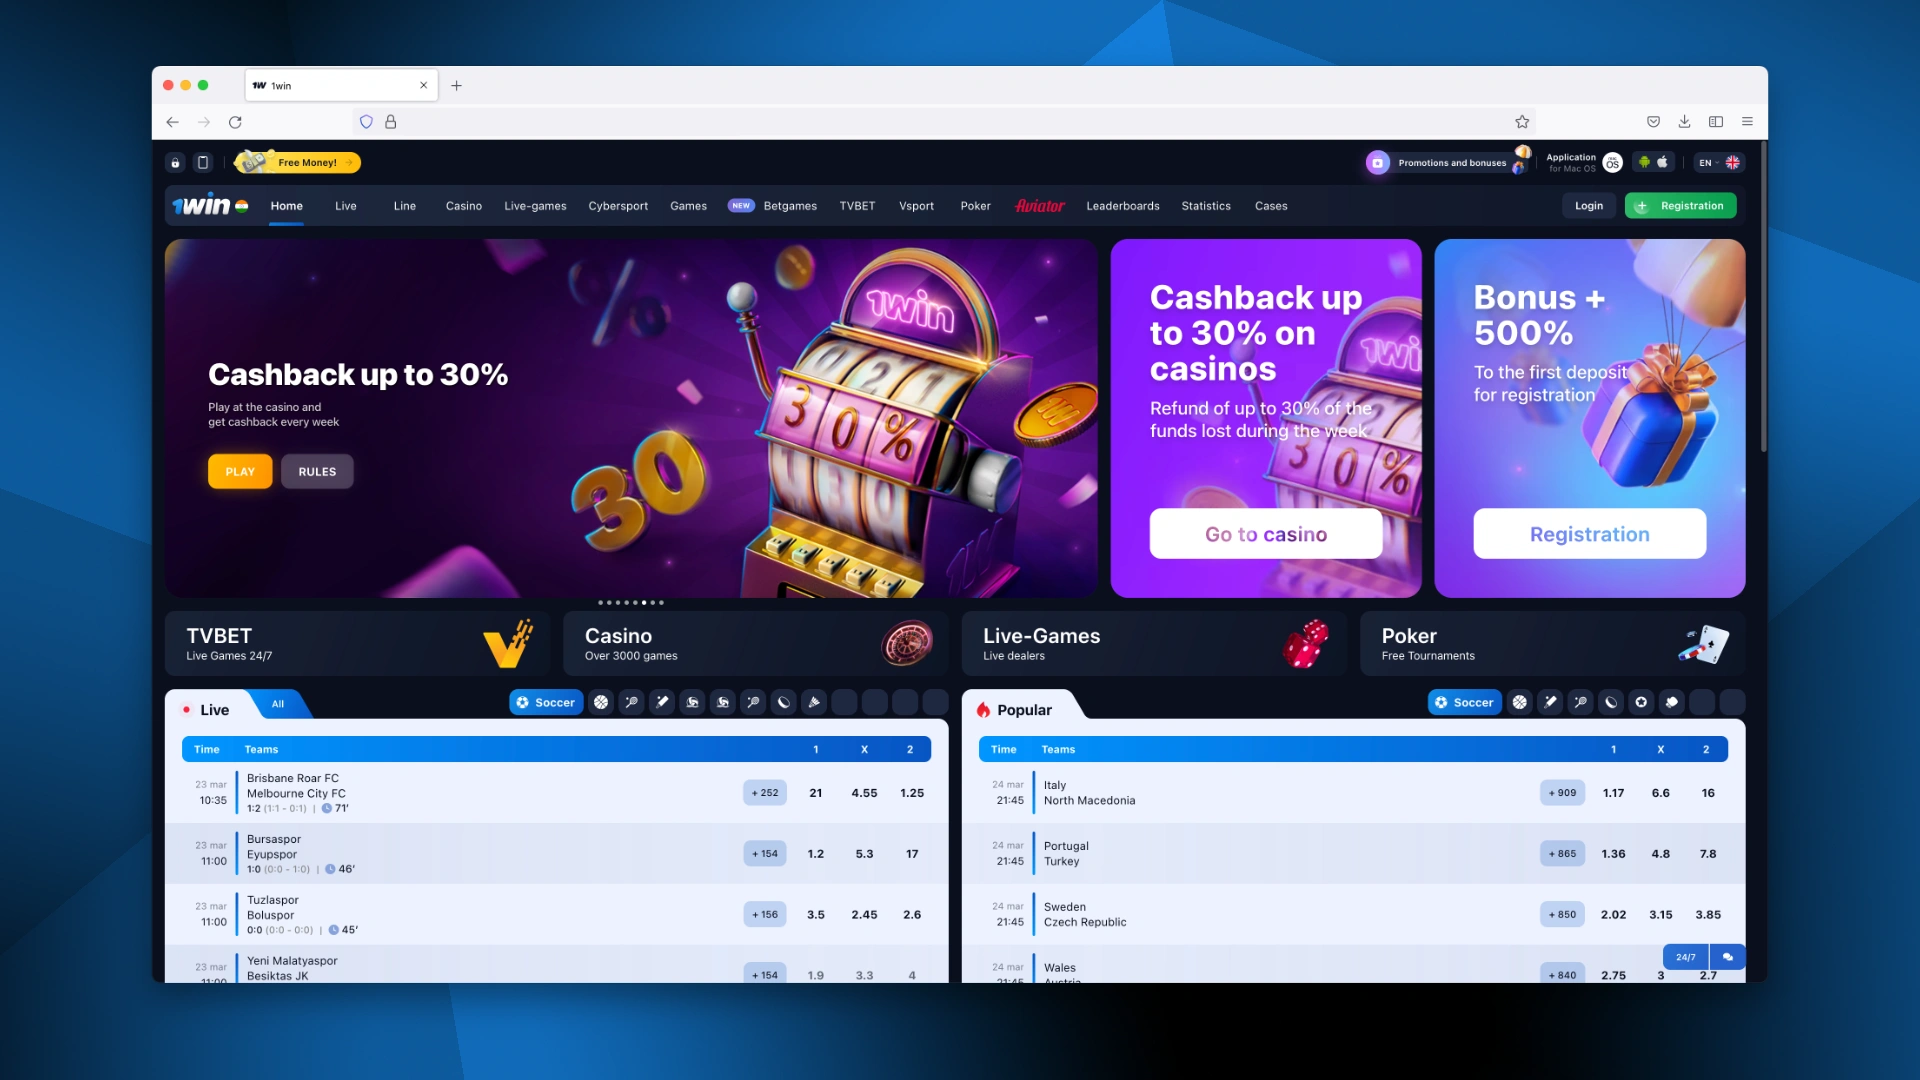 Main page of the 1Win sports betting platform